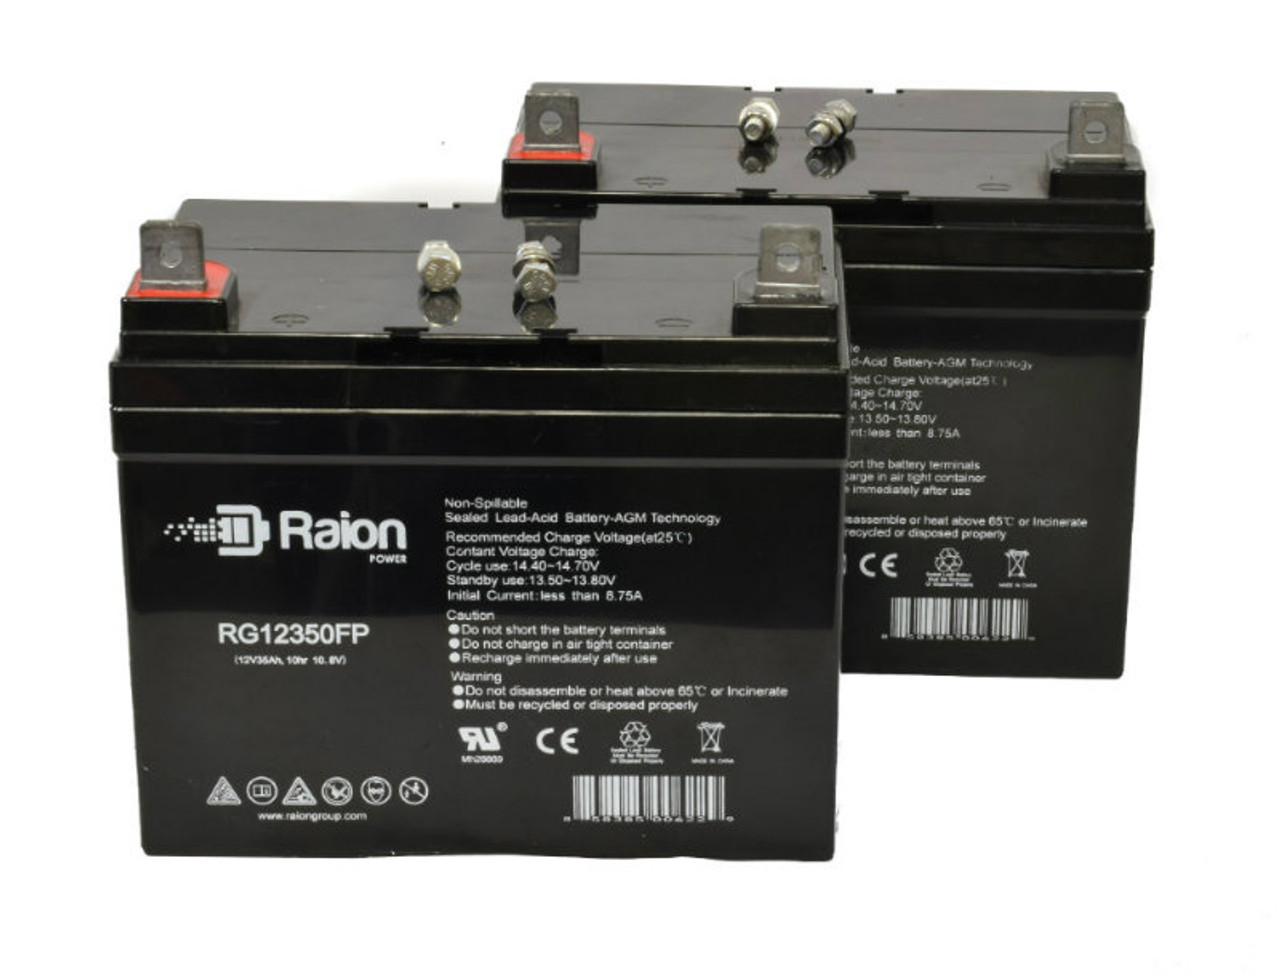 Raion Power Replacement 12V 35Ah Lawn Mower Battery for Woods 6140 - 2 Pack